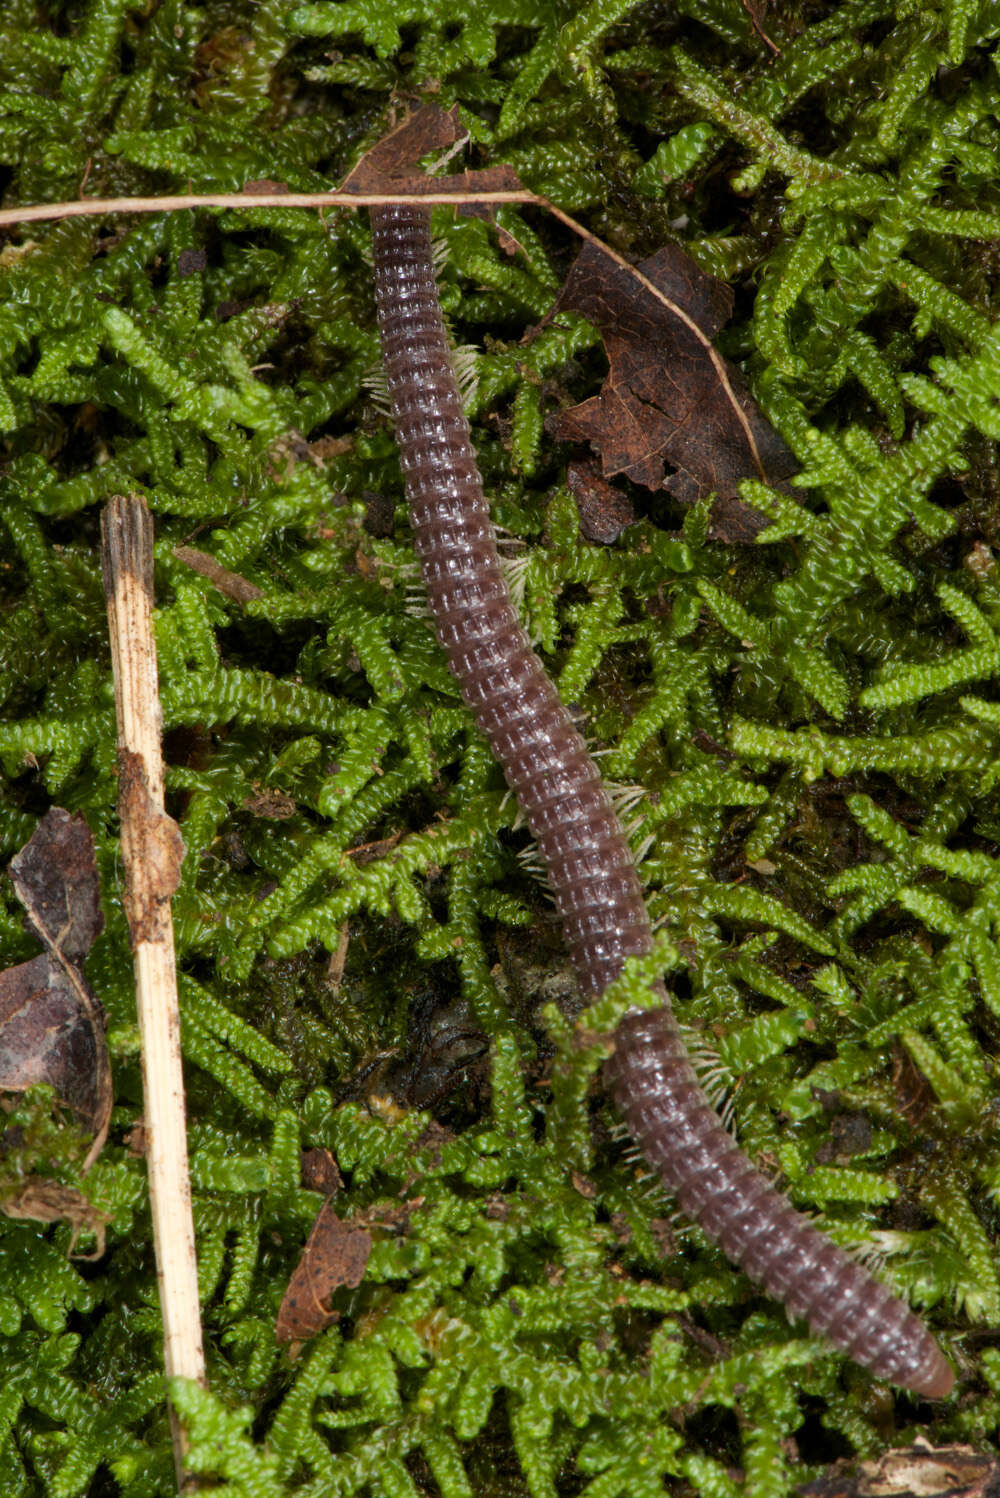 Image of millipedes